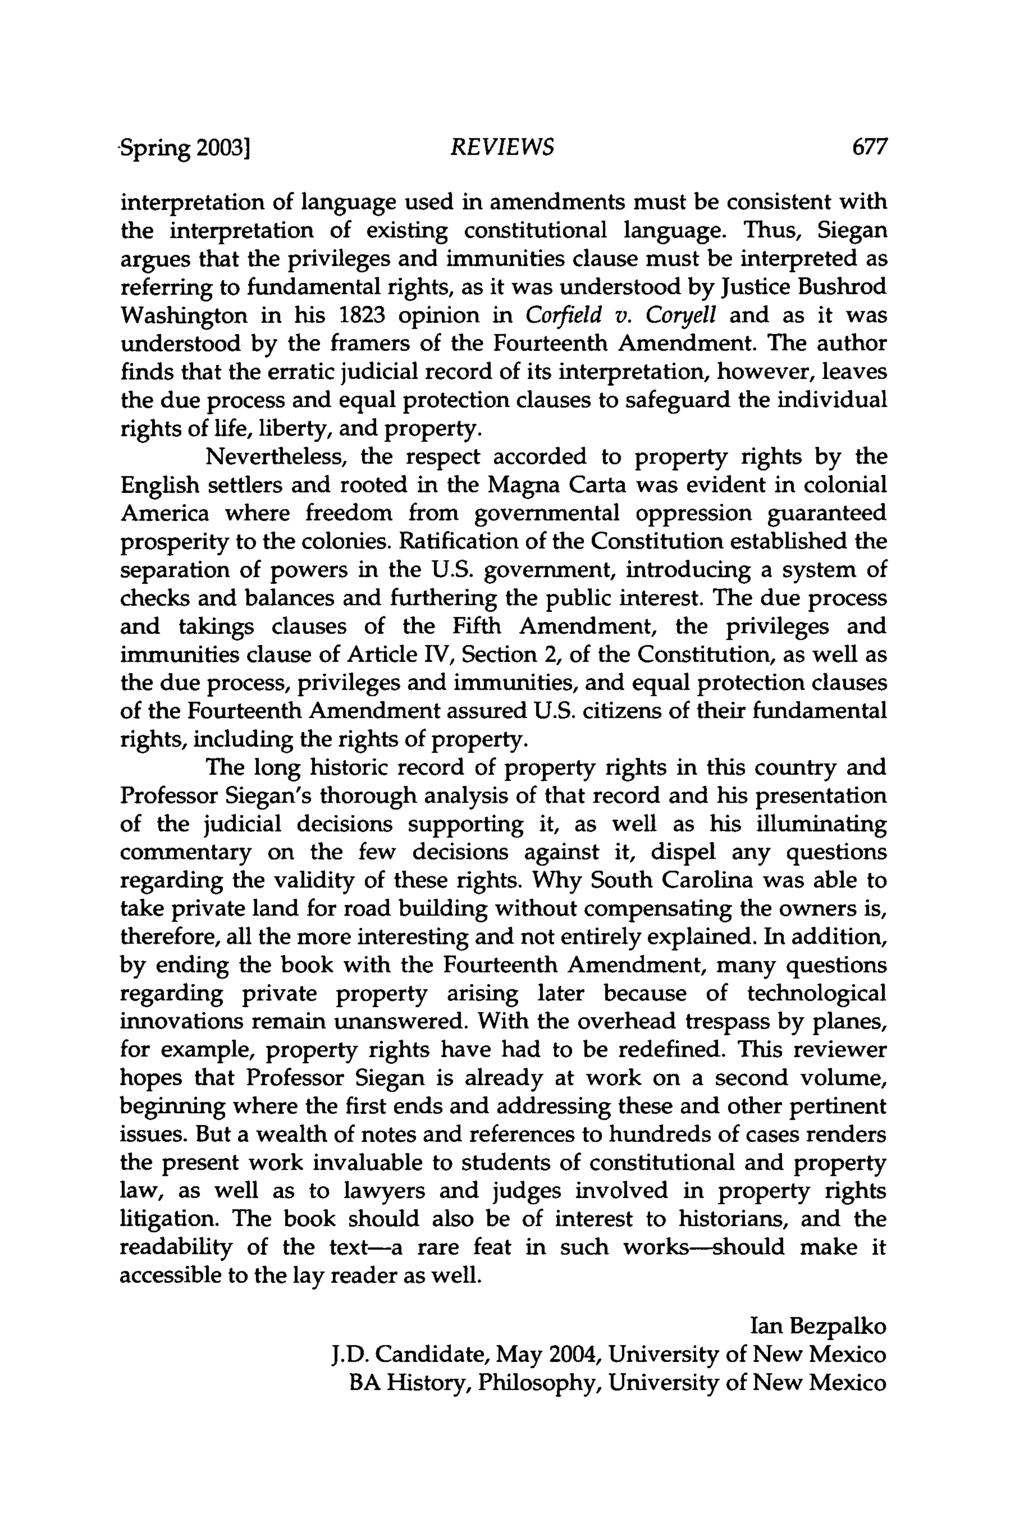 -Spring 20031 REVIEWS interpretation of language used in amendments must be consistent with the interpretation of existing constitutional language.